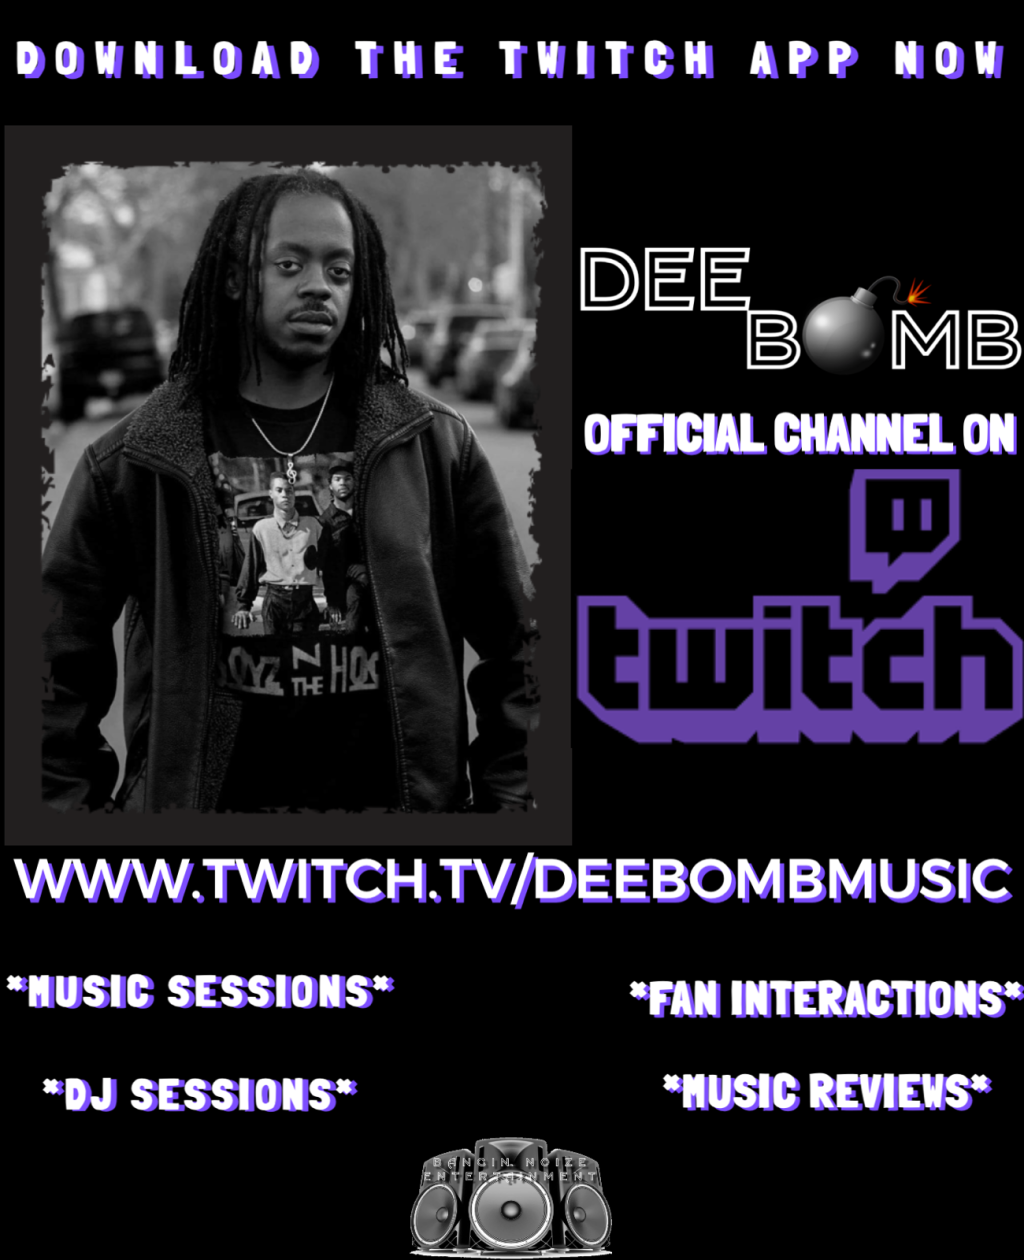 Dee Bomb is Officially on Twitch